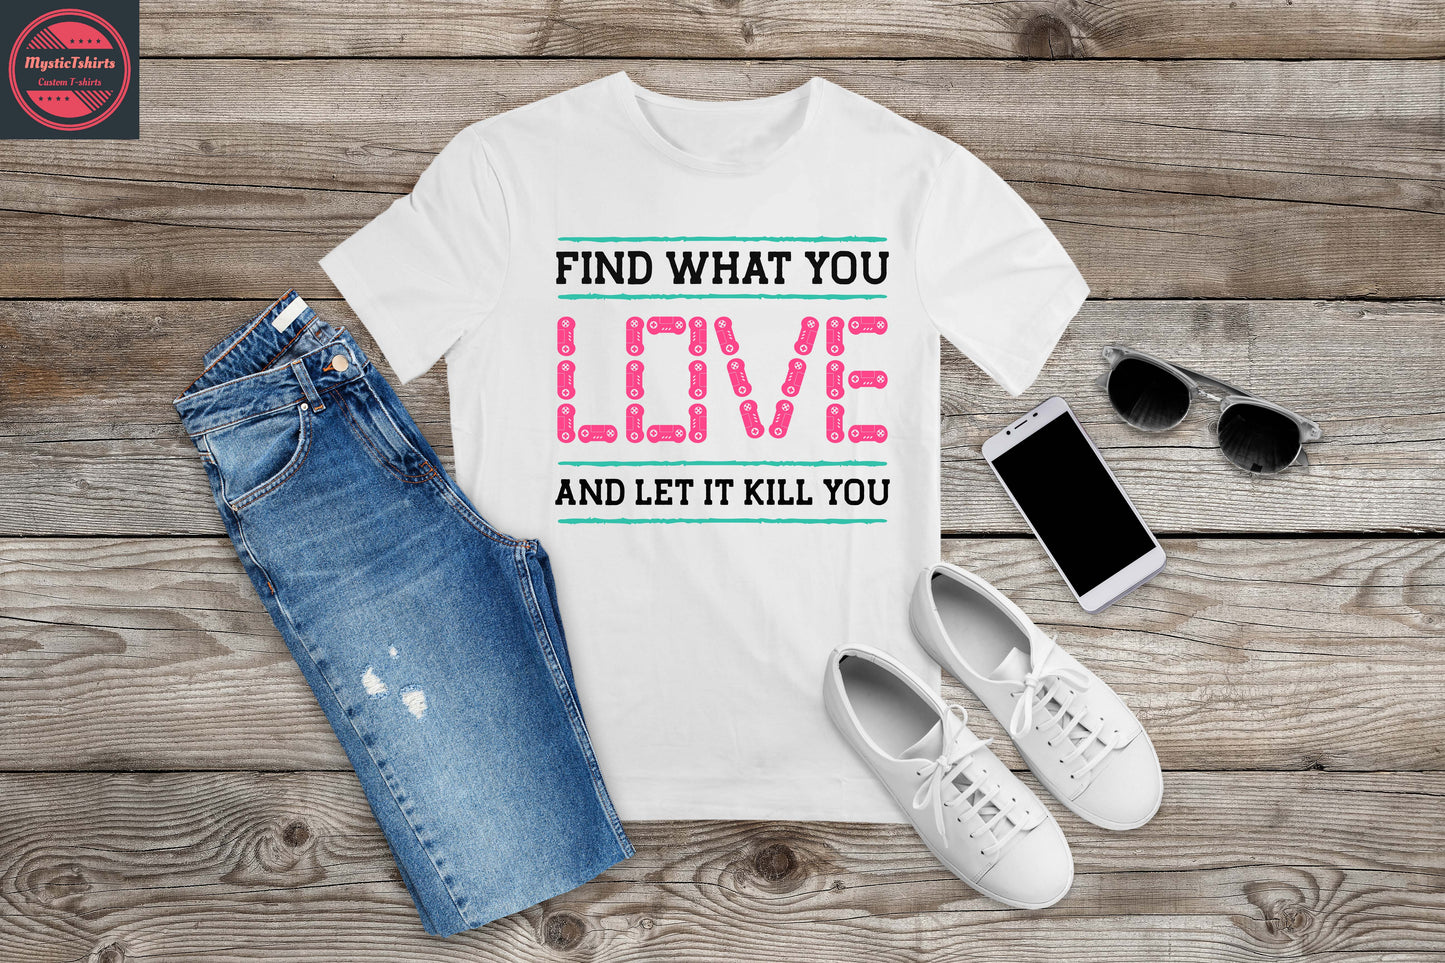 146. FIND WHAT YOU LOVE AND LET IT KILL YOU, Custom Made Shirt, Personalized T-Shirt, Custom Text, Make Your Own Shirt, Custom Tee